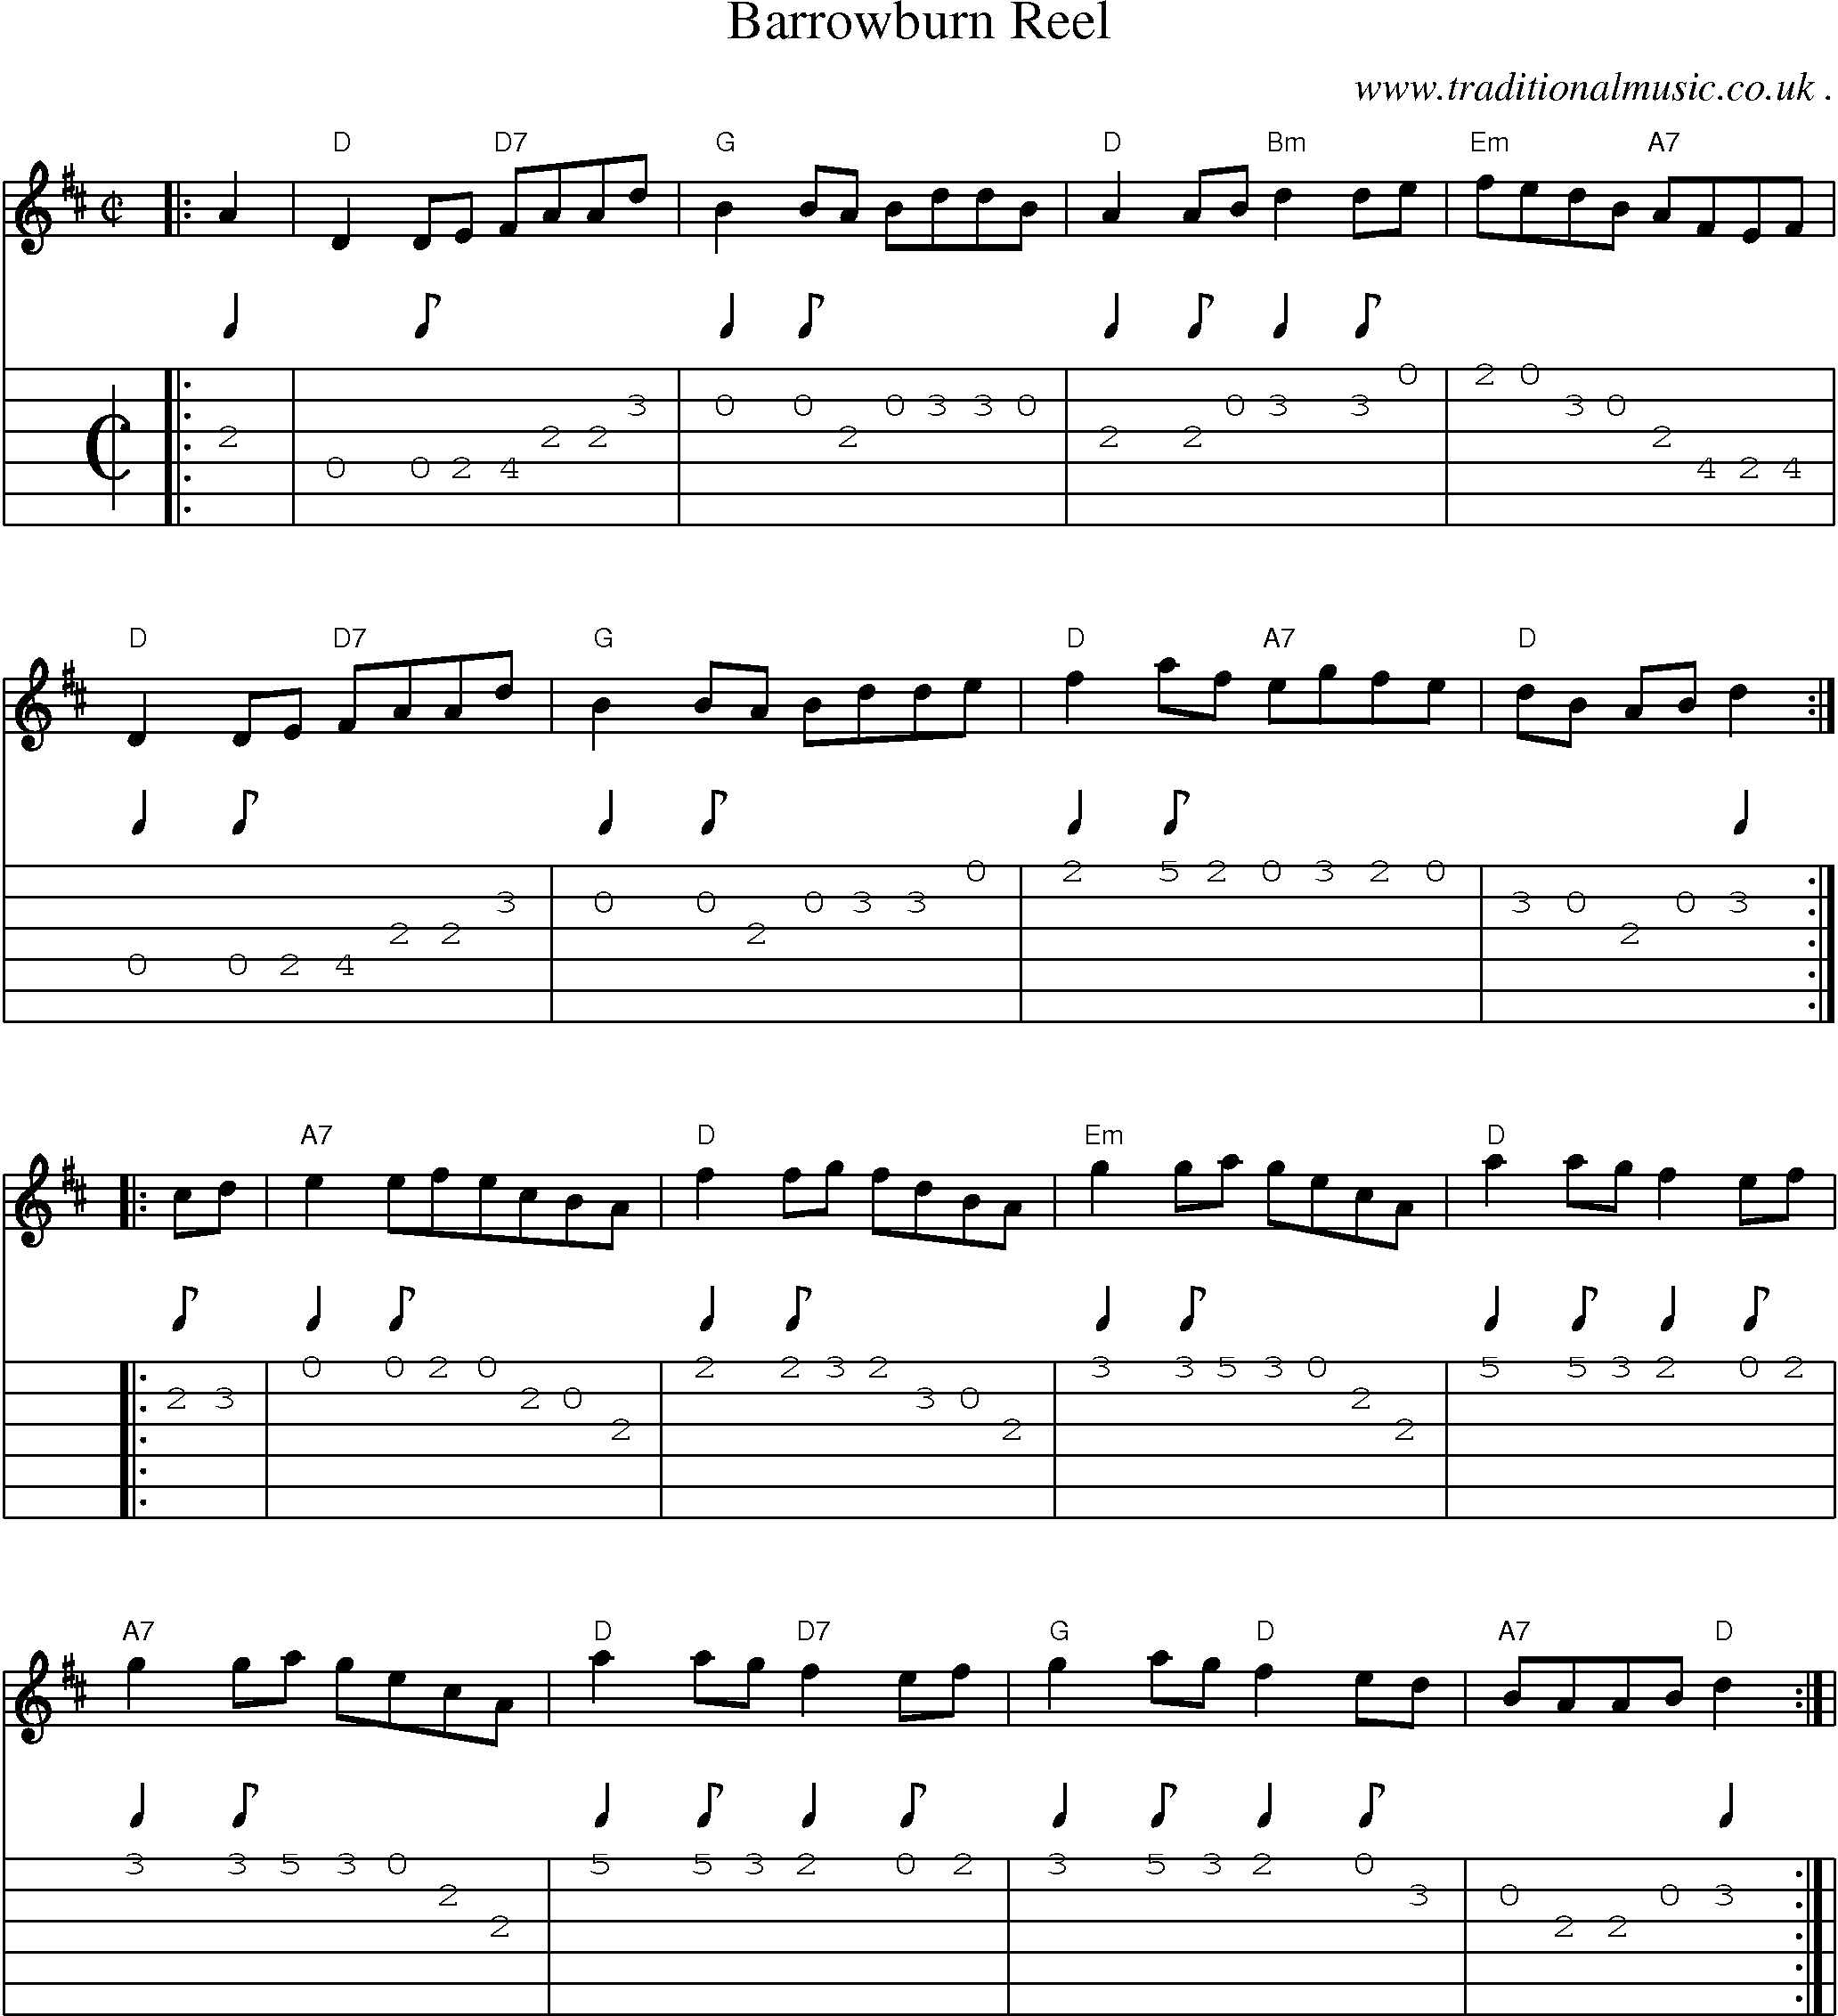 Music Score and Guitar Tabs for Barrowburn Reel